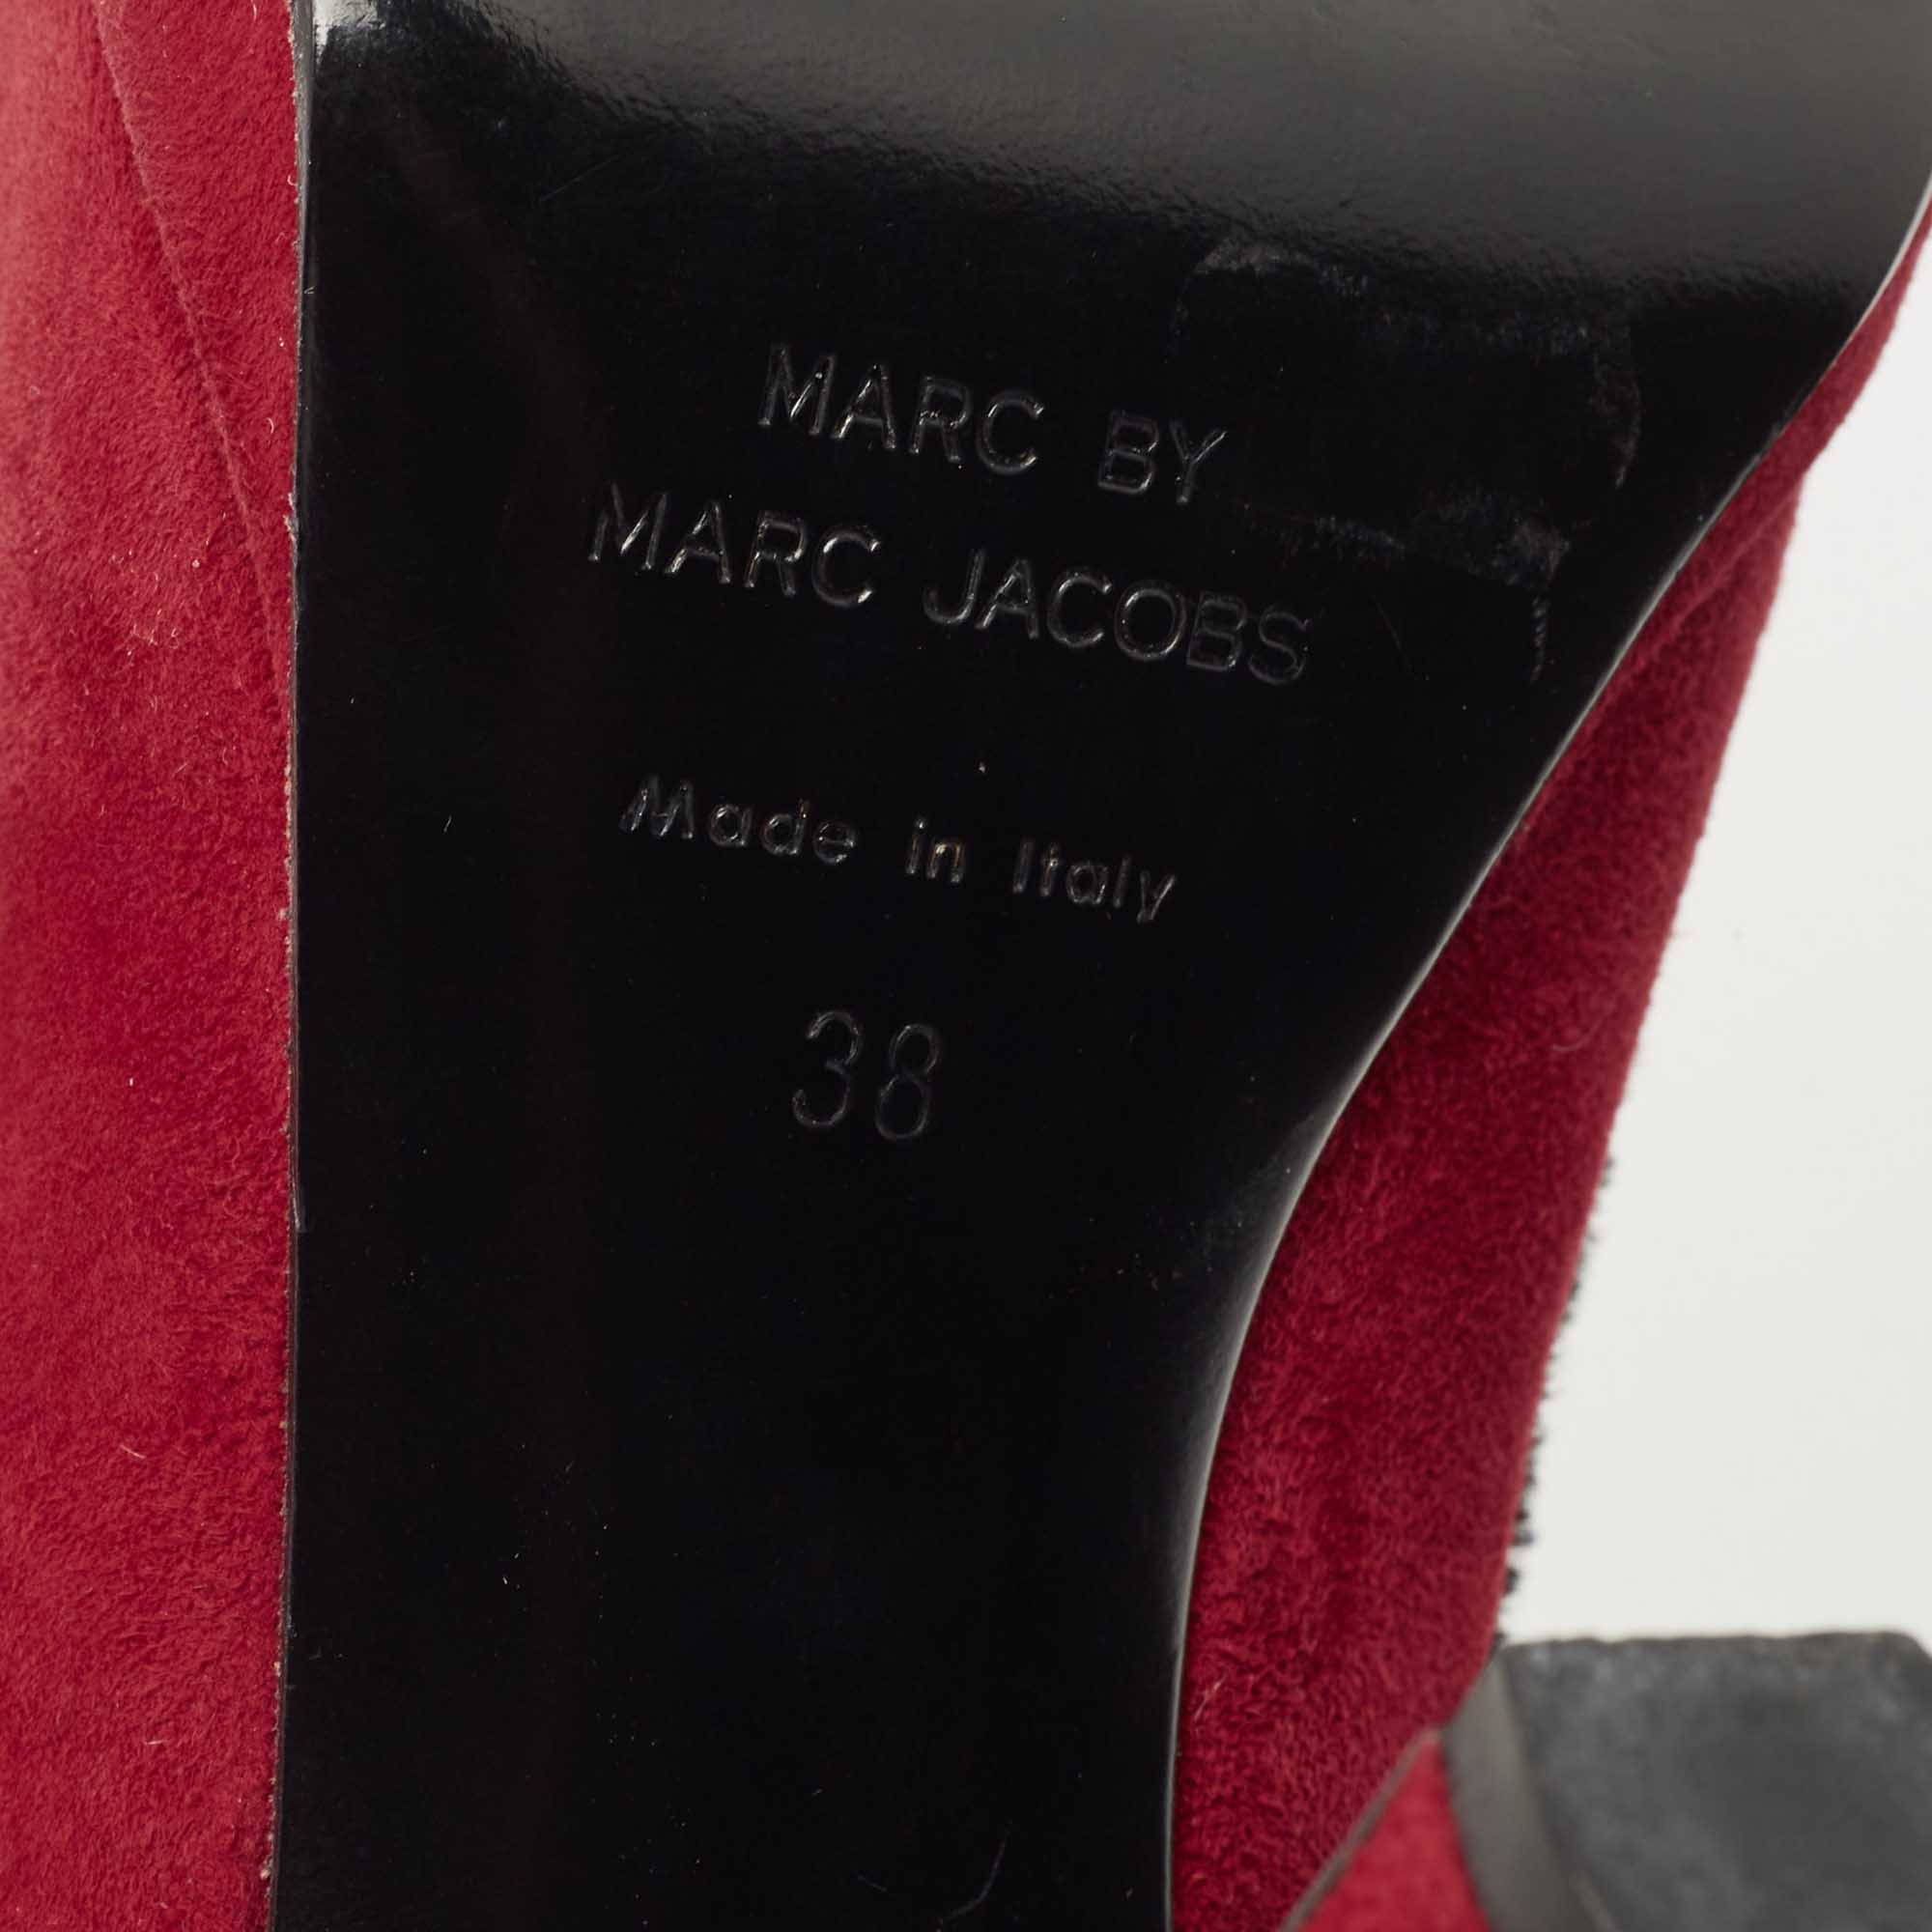 Marc By Marc Jacobs Red/Black Suede Block Heel Pumps Size 38